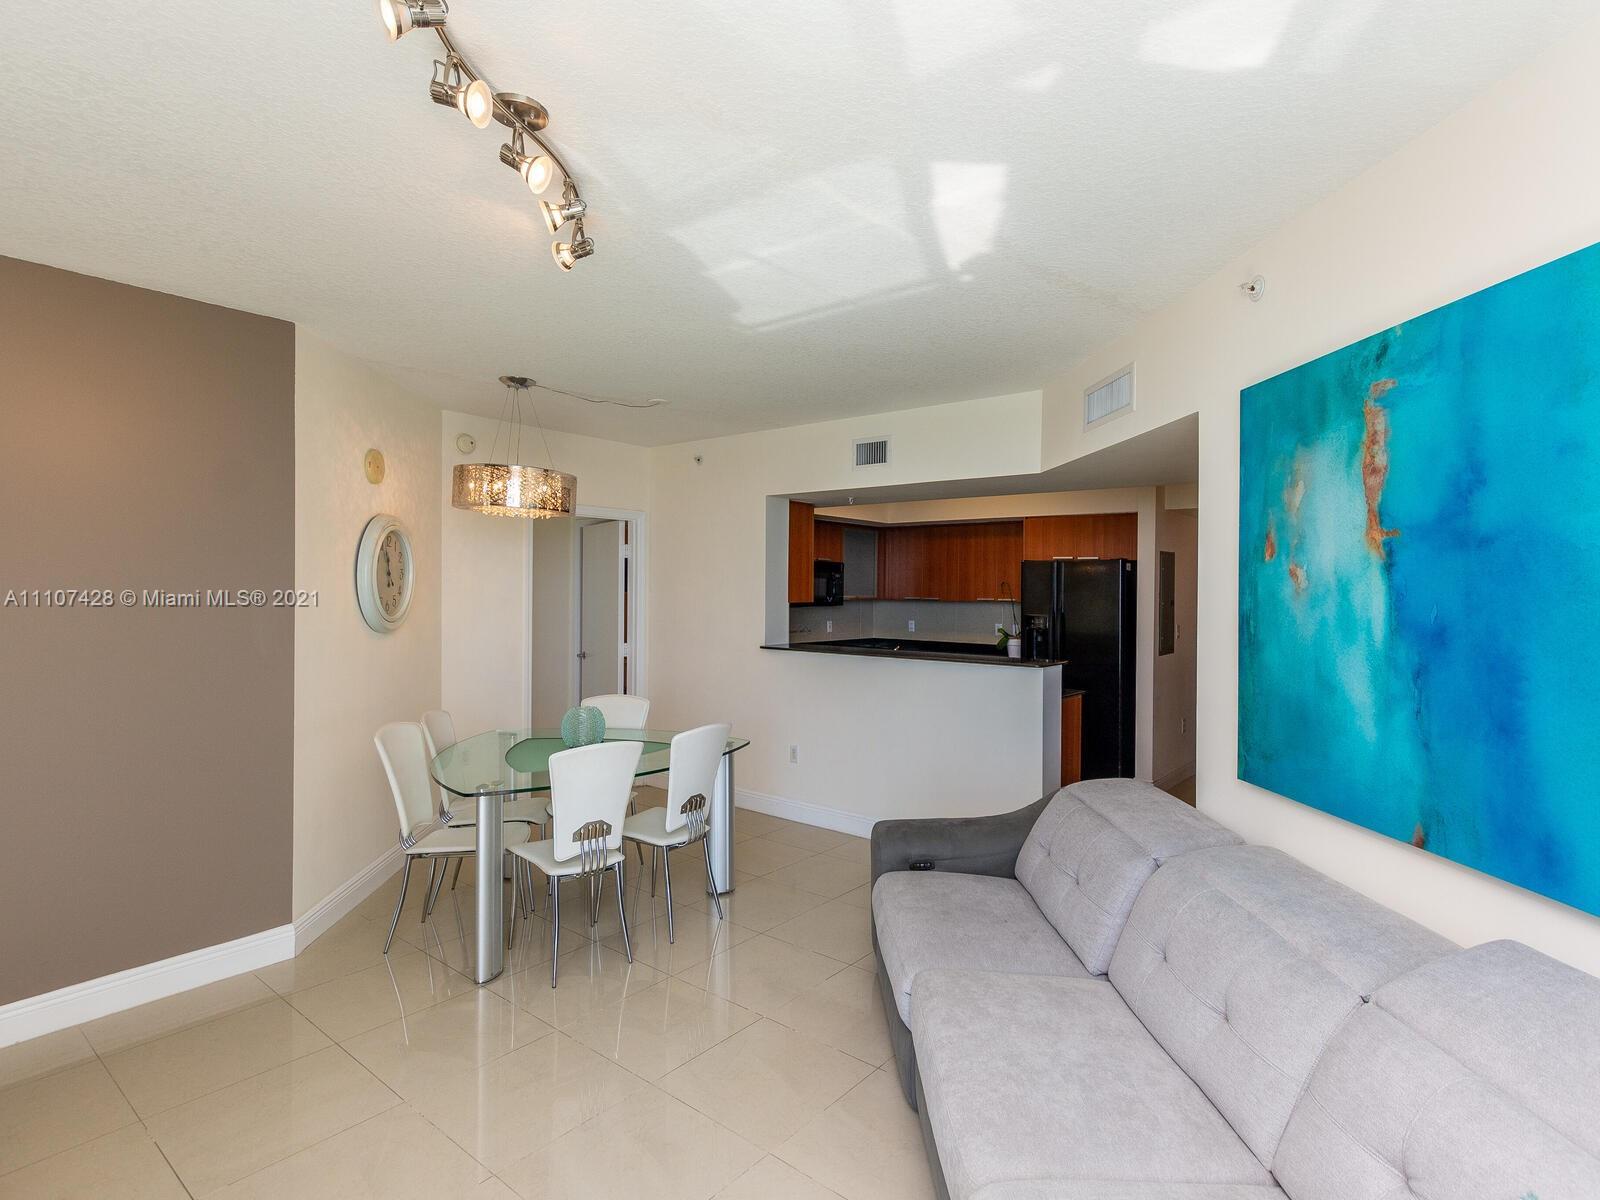 16699 Collins Ave 1709, Sunny Isles Beach, Florida 33160, 2 Bedrooms Bedrooms, ,2 BathroomsBathrooms,Residentiallease,For Rent,16699 Collins Ave 1709,A11107428